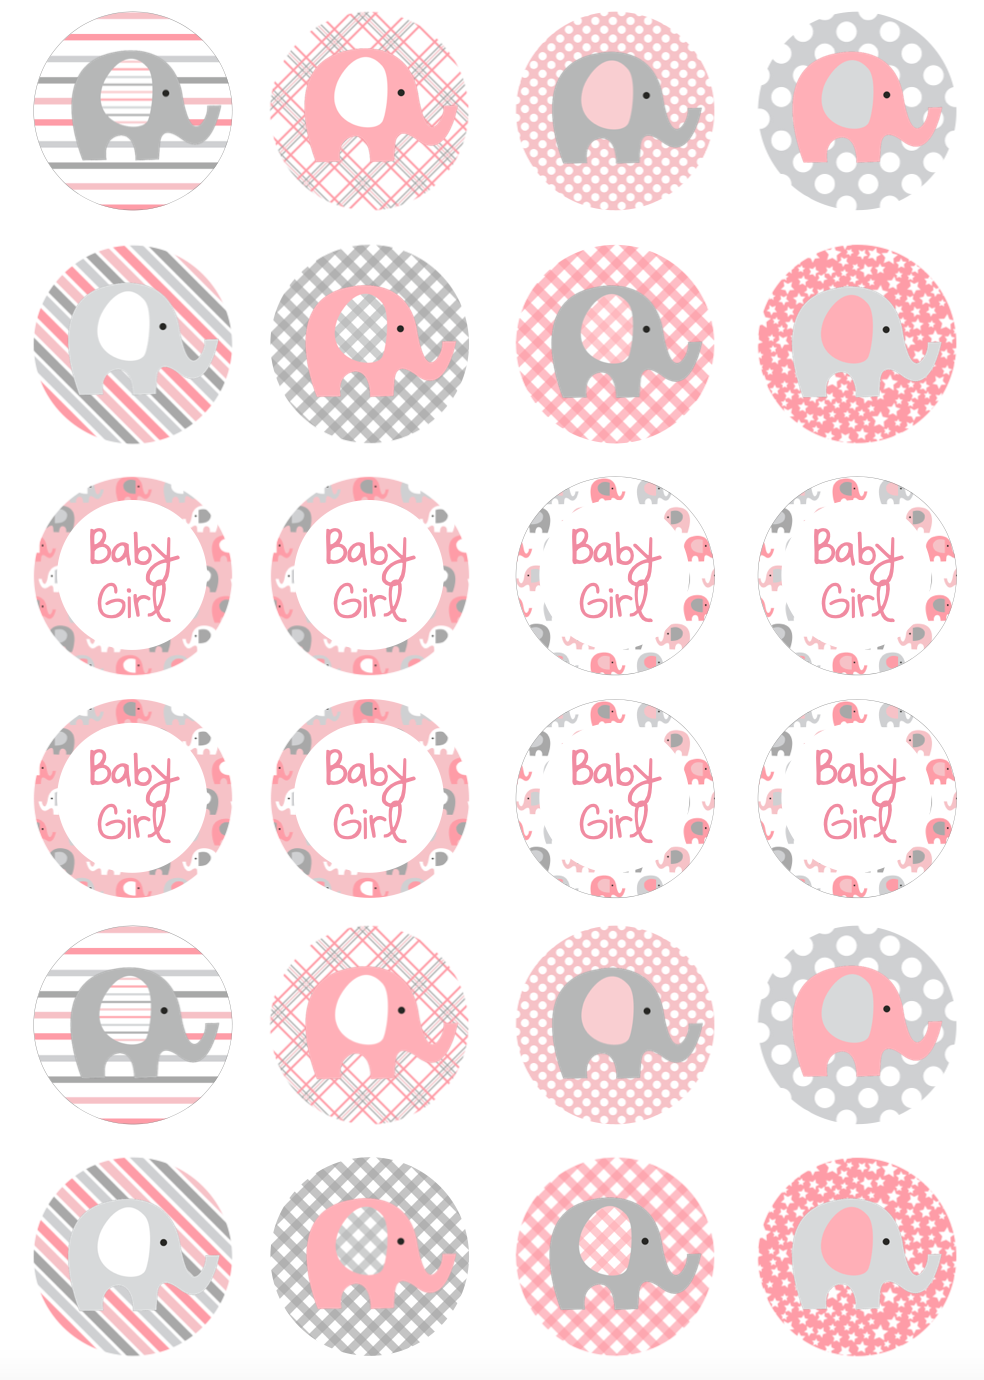 Baby Shower Girl Elephant Cupcake Edible Icing Image Toppers